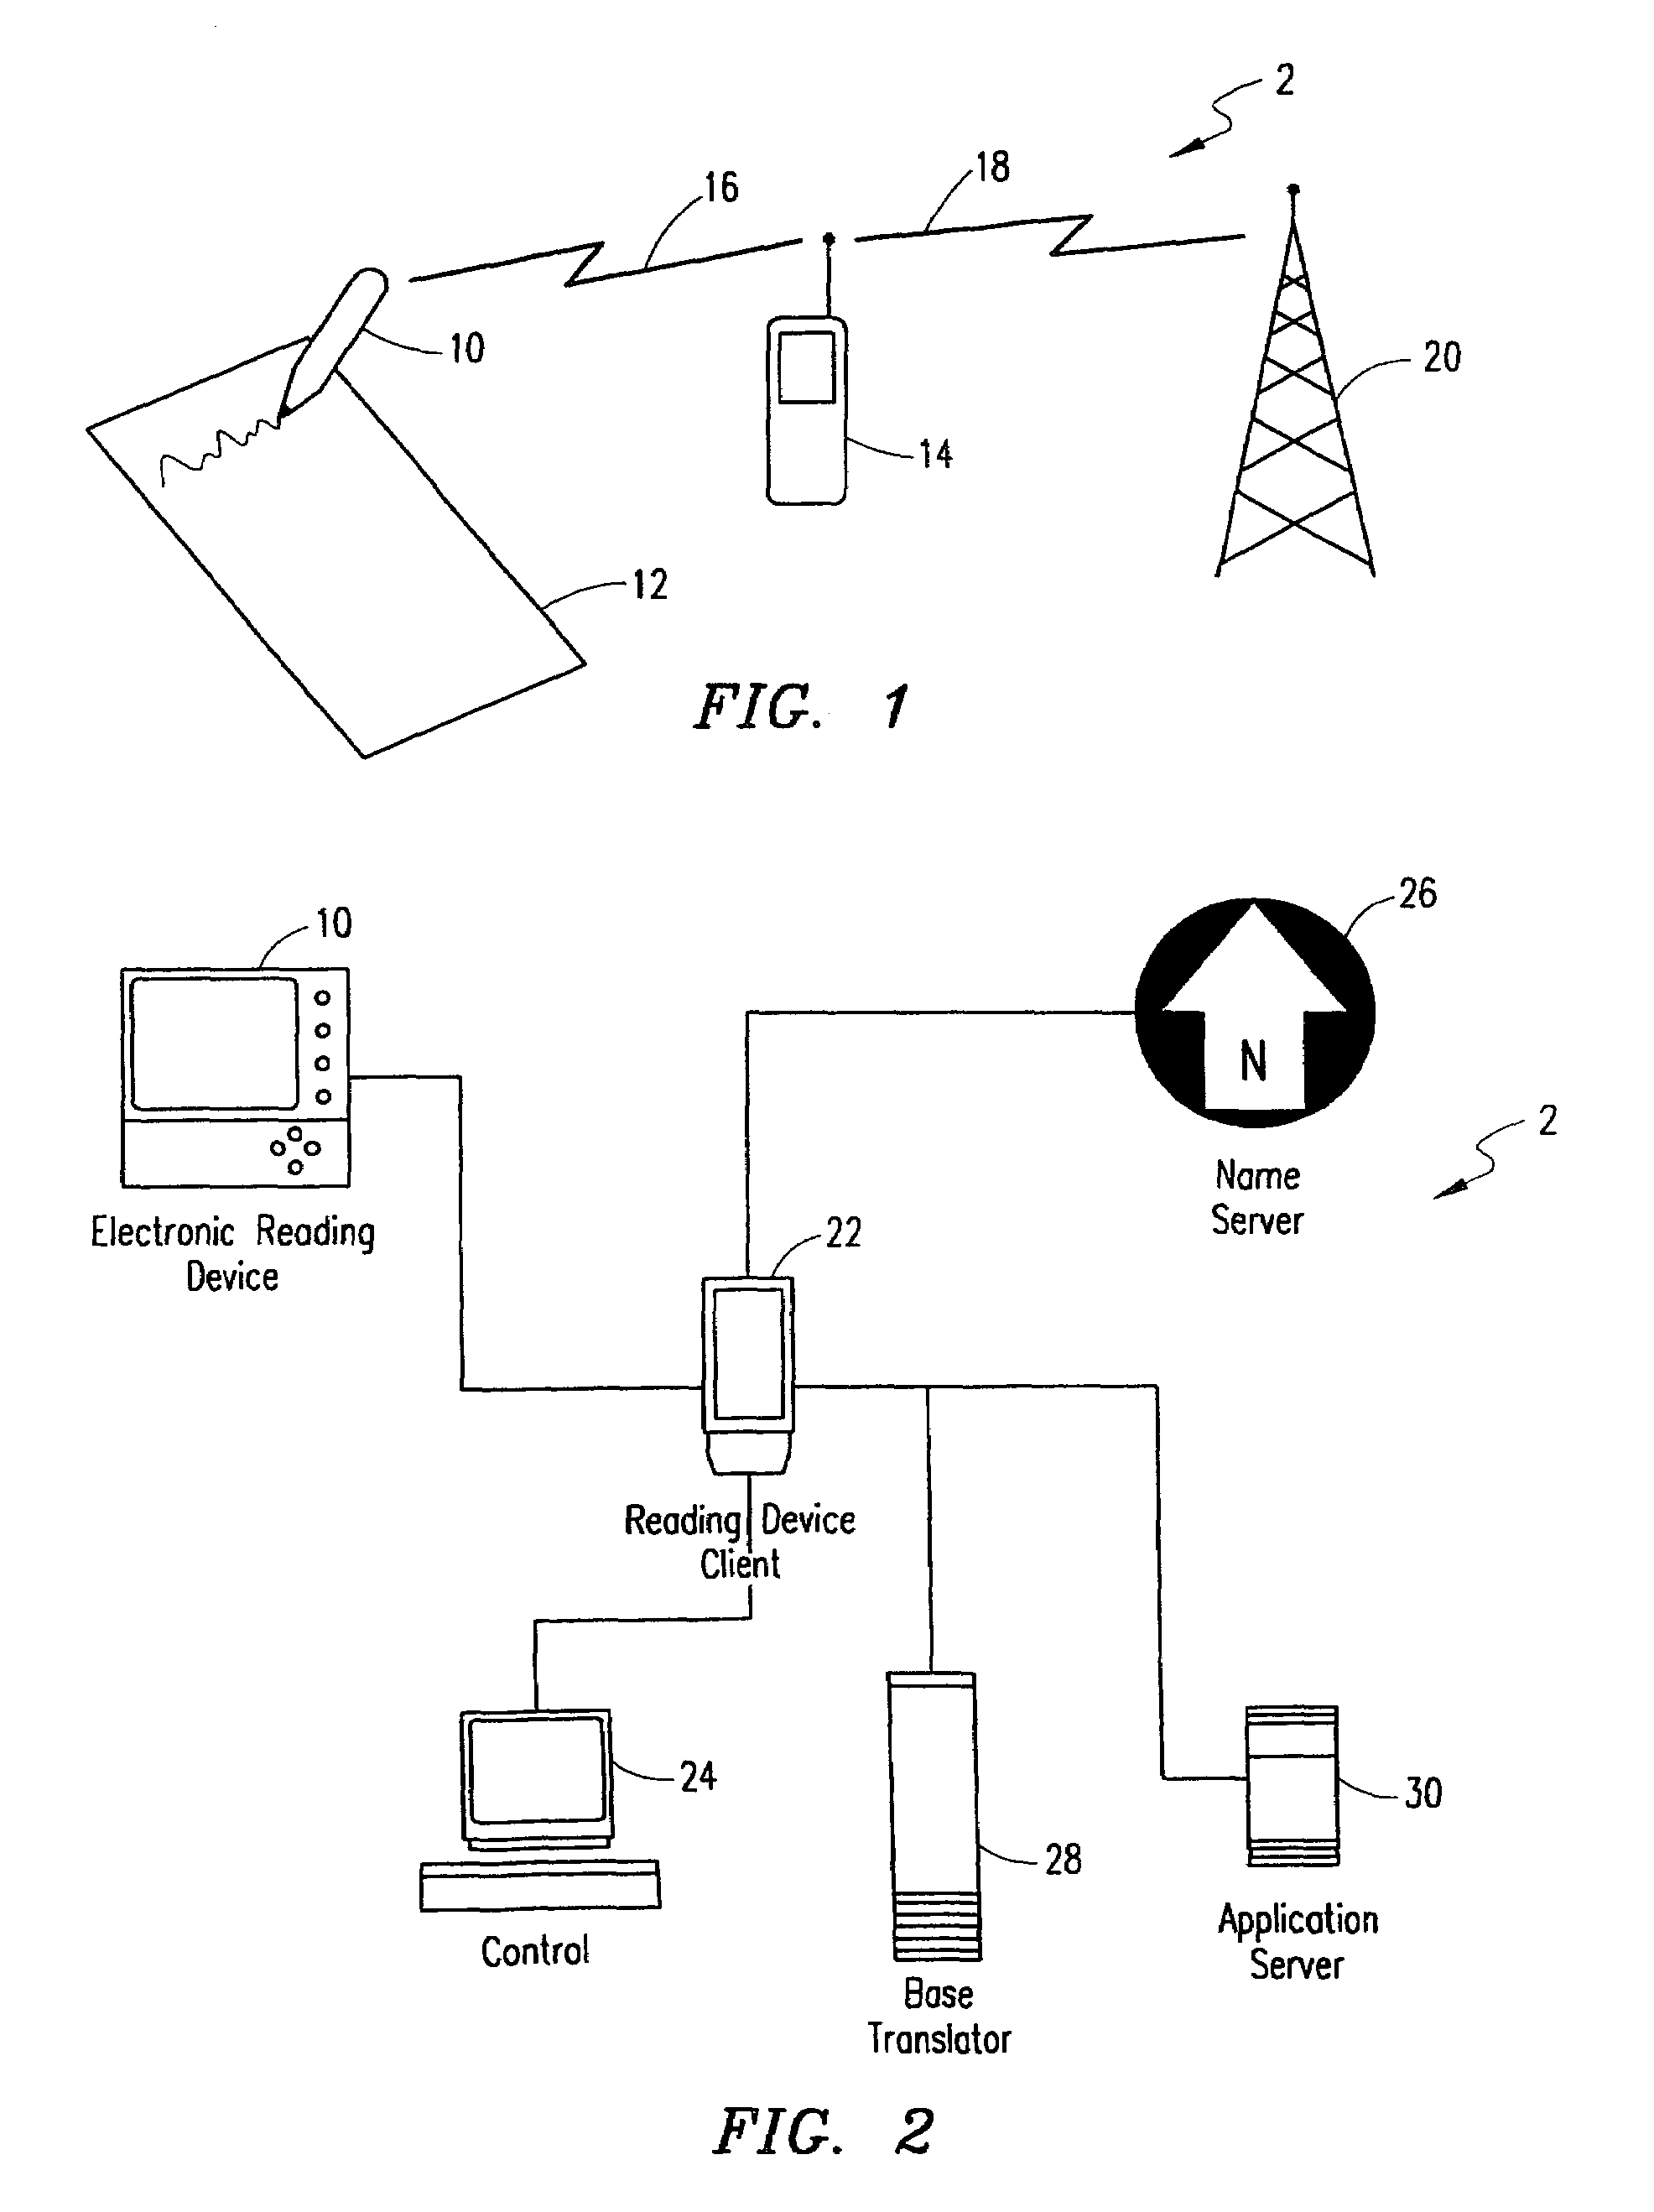 Method and system for electronically recording transactions and performing security function